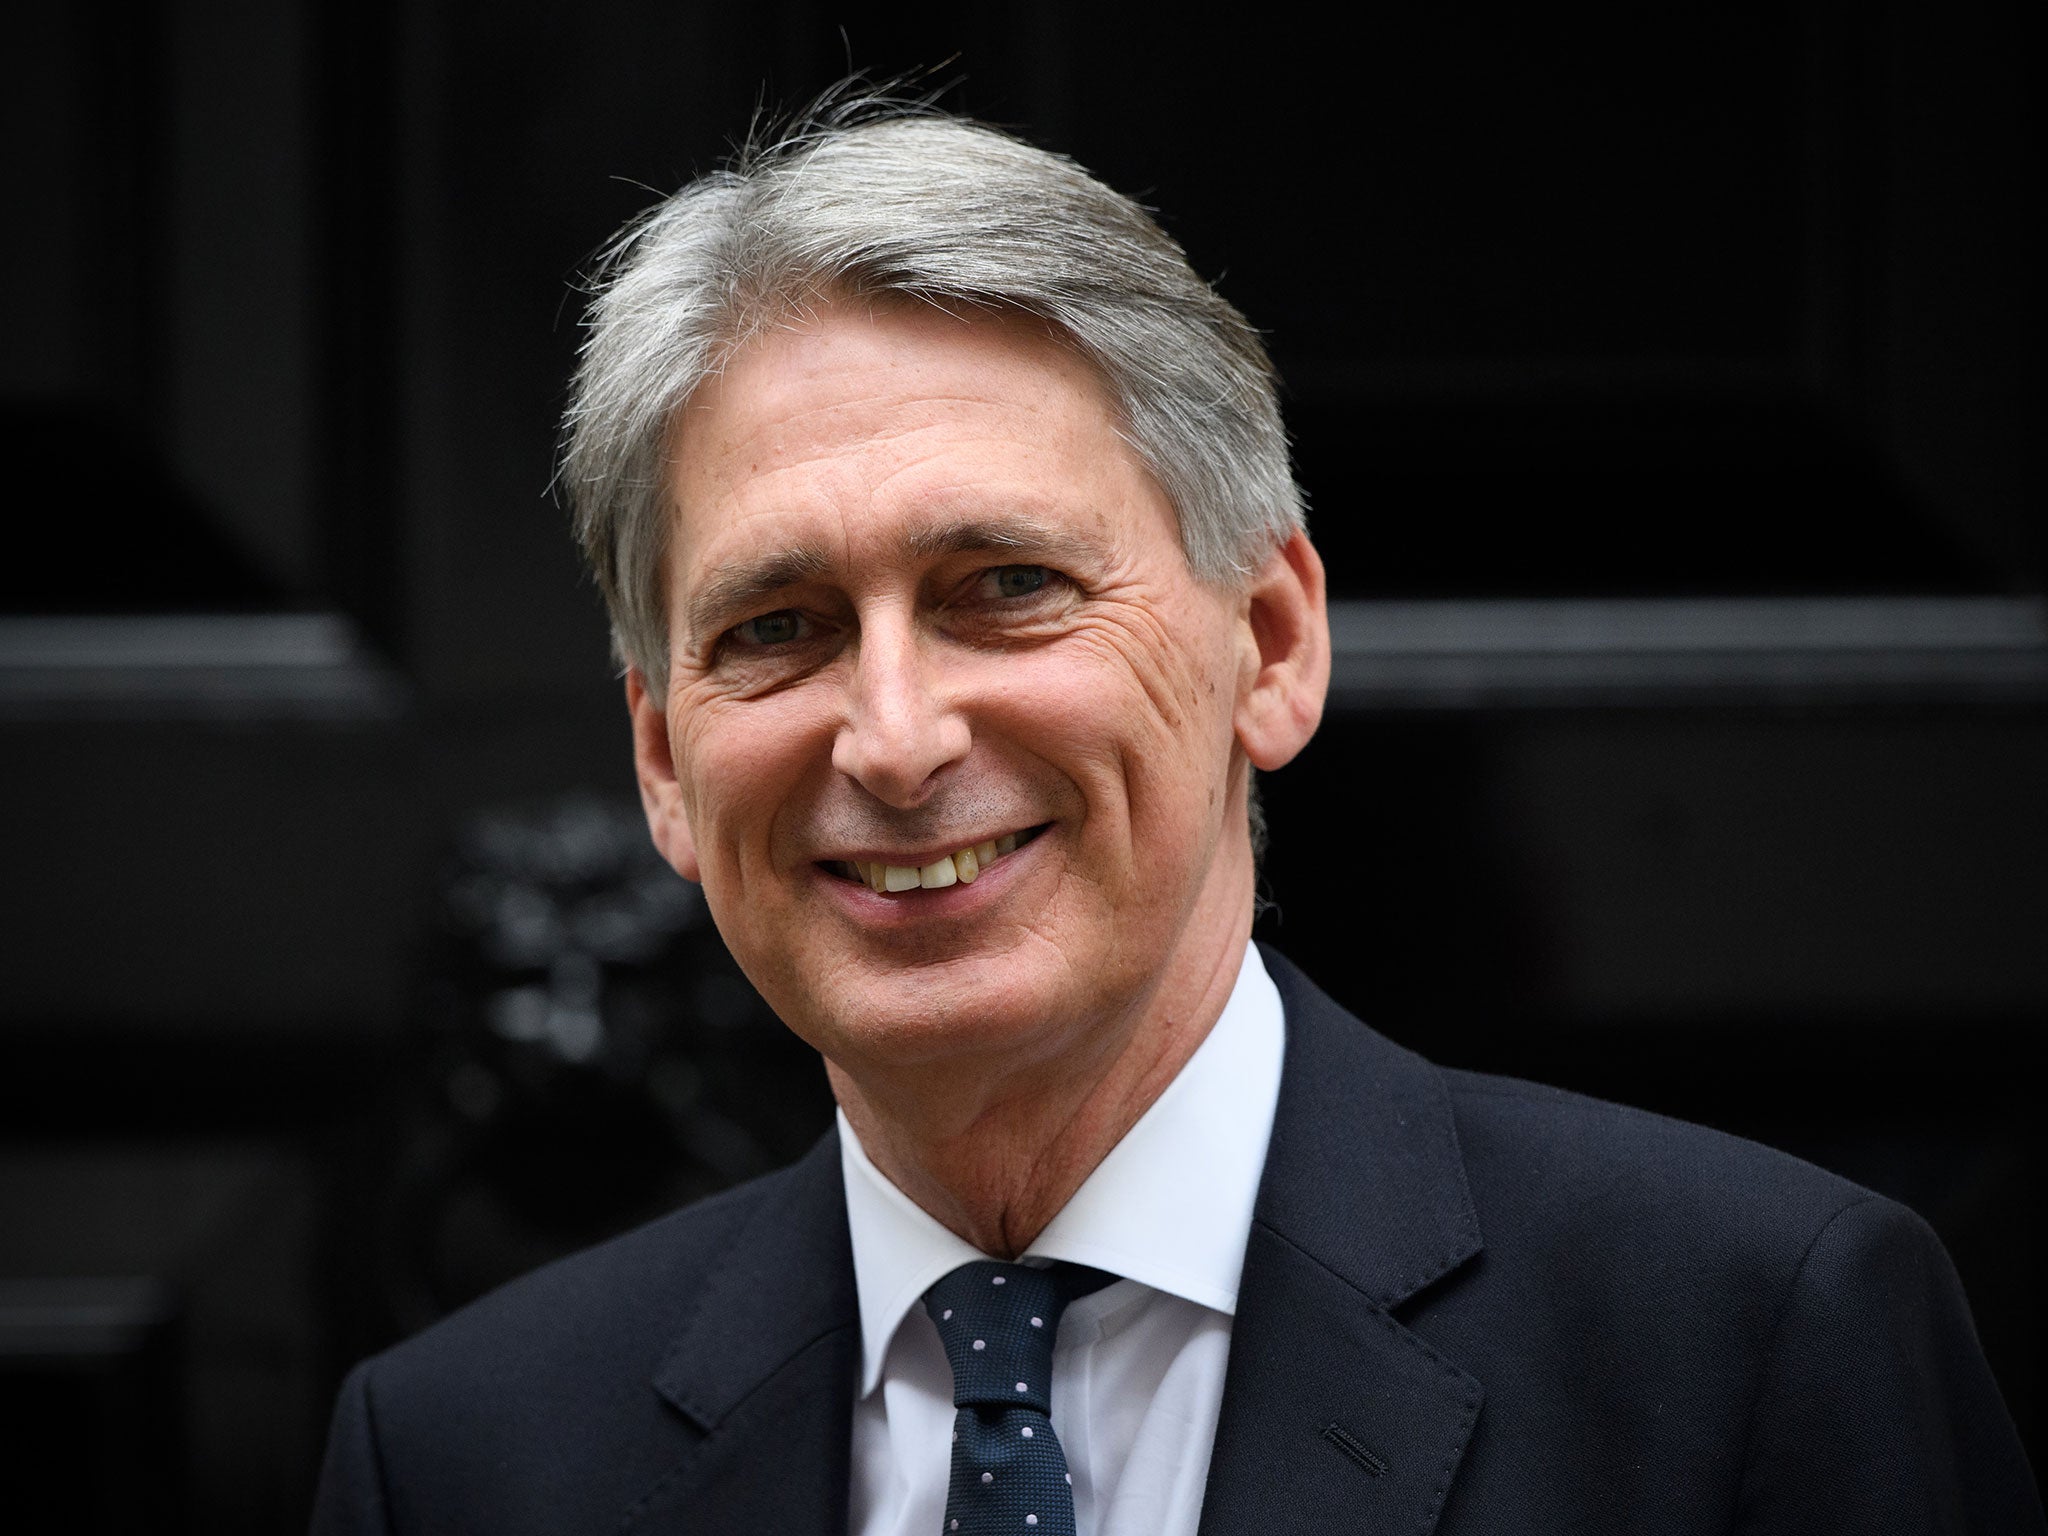 The Chancellor said the Bank's Monetary Policy Committee will continue to make decisions on interest rates